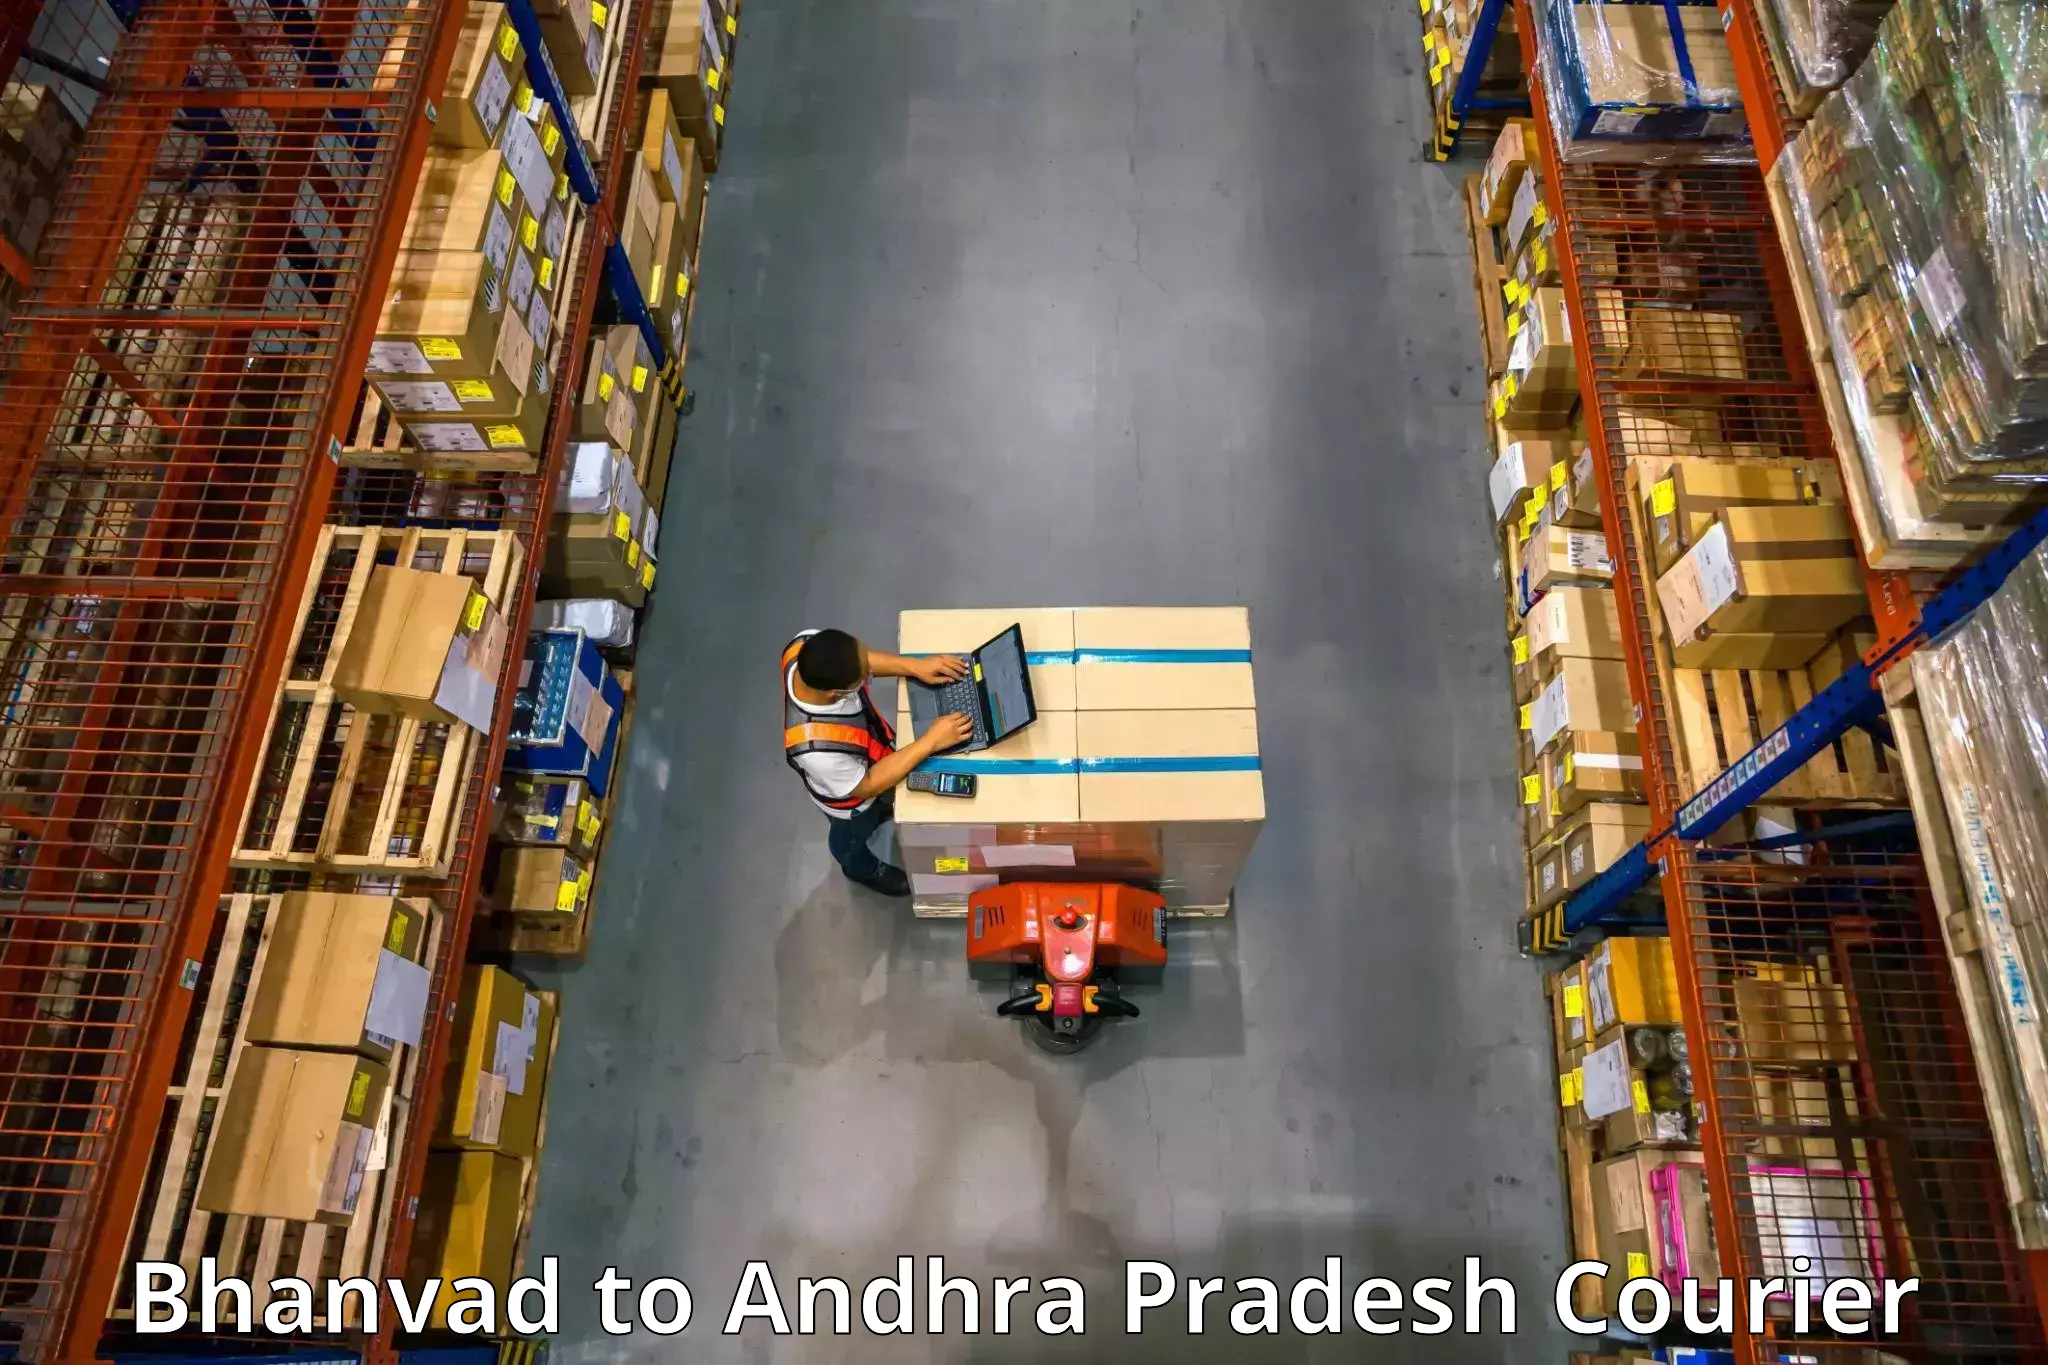 Household logistics services in Bhanvad to Visakhapatnam Port